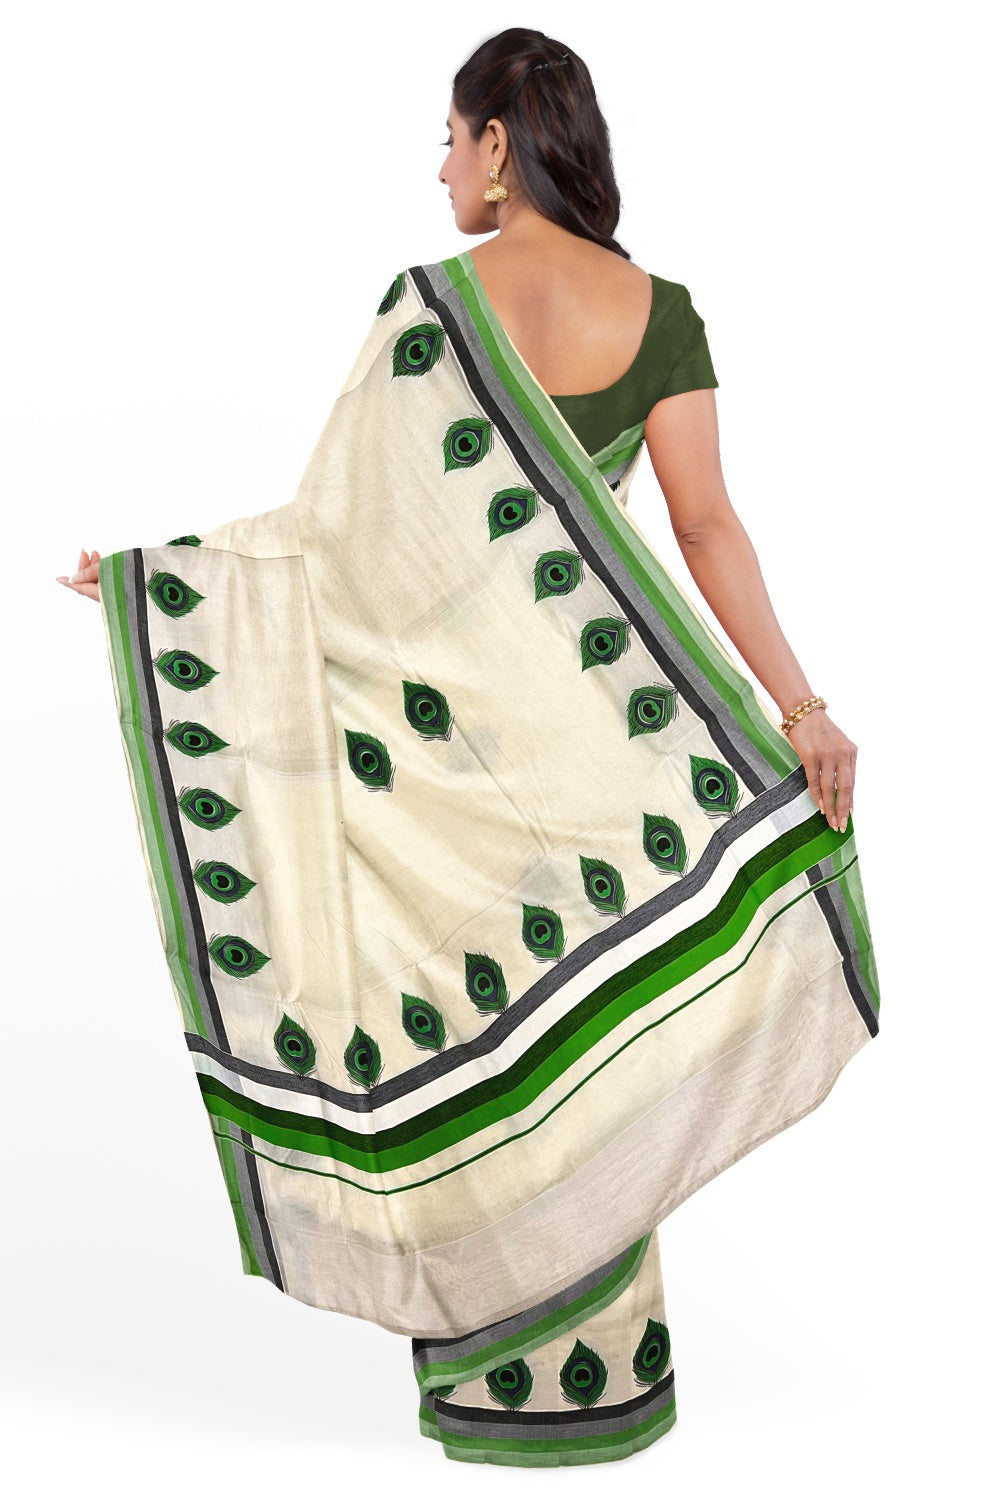 Kerala Cotton Saree with Green Peacock Feather Mural Printed and Multi Colour Border